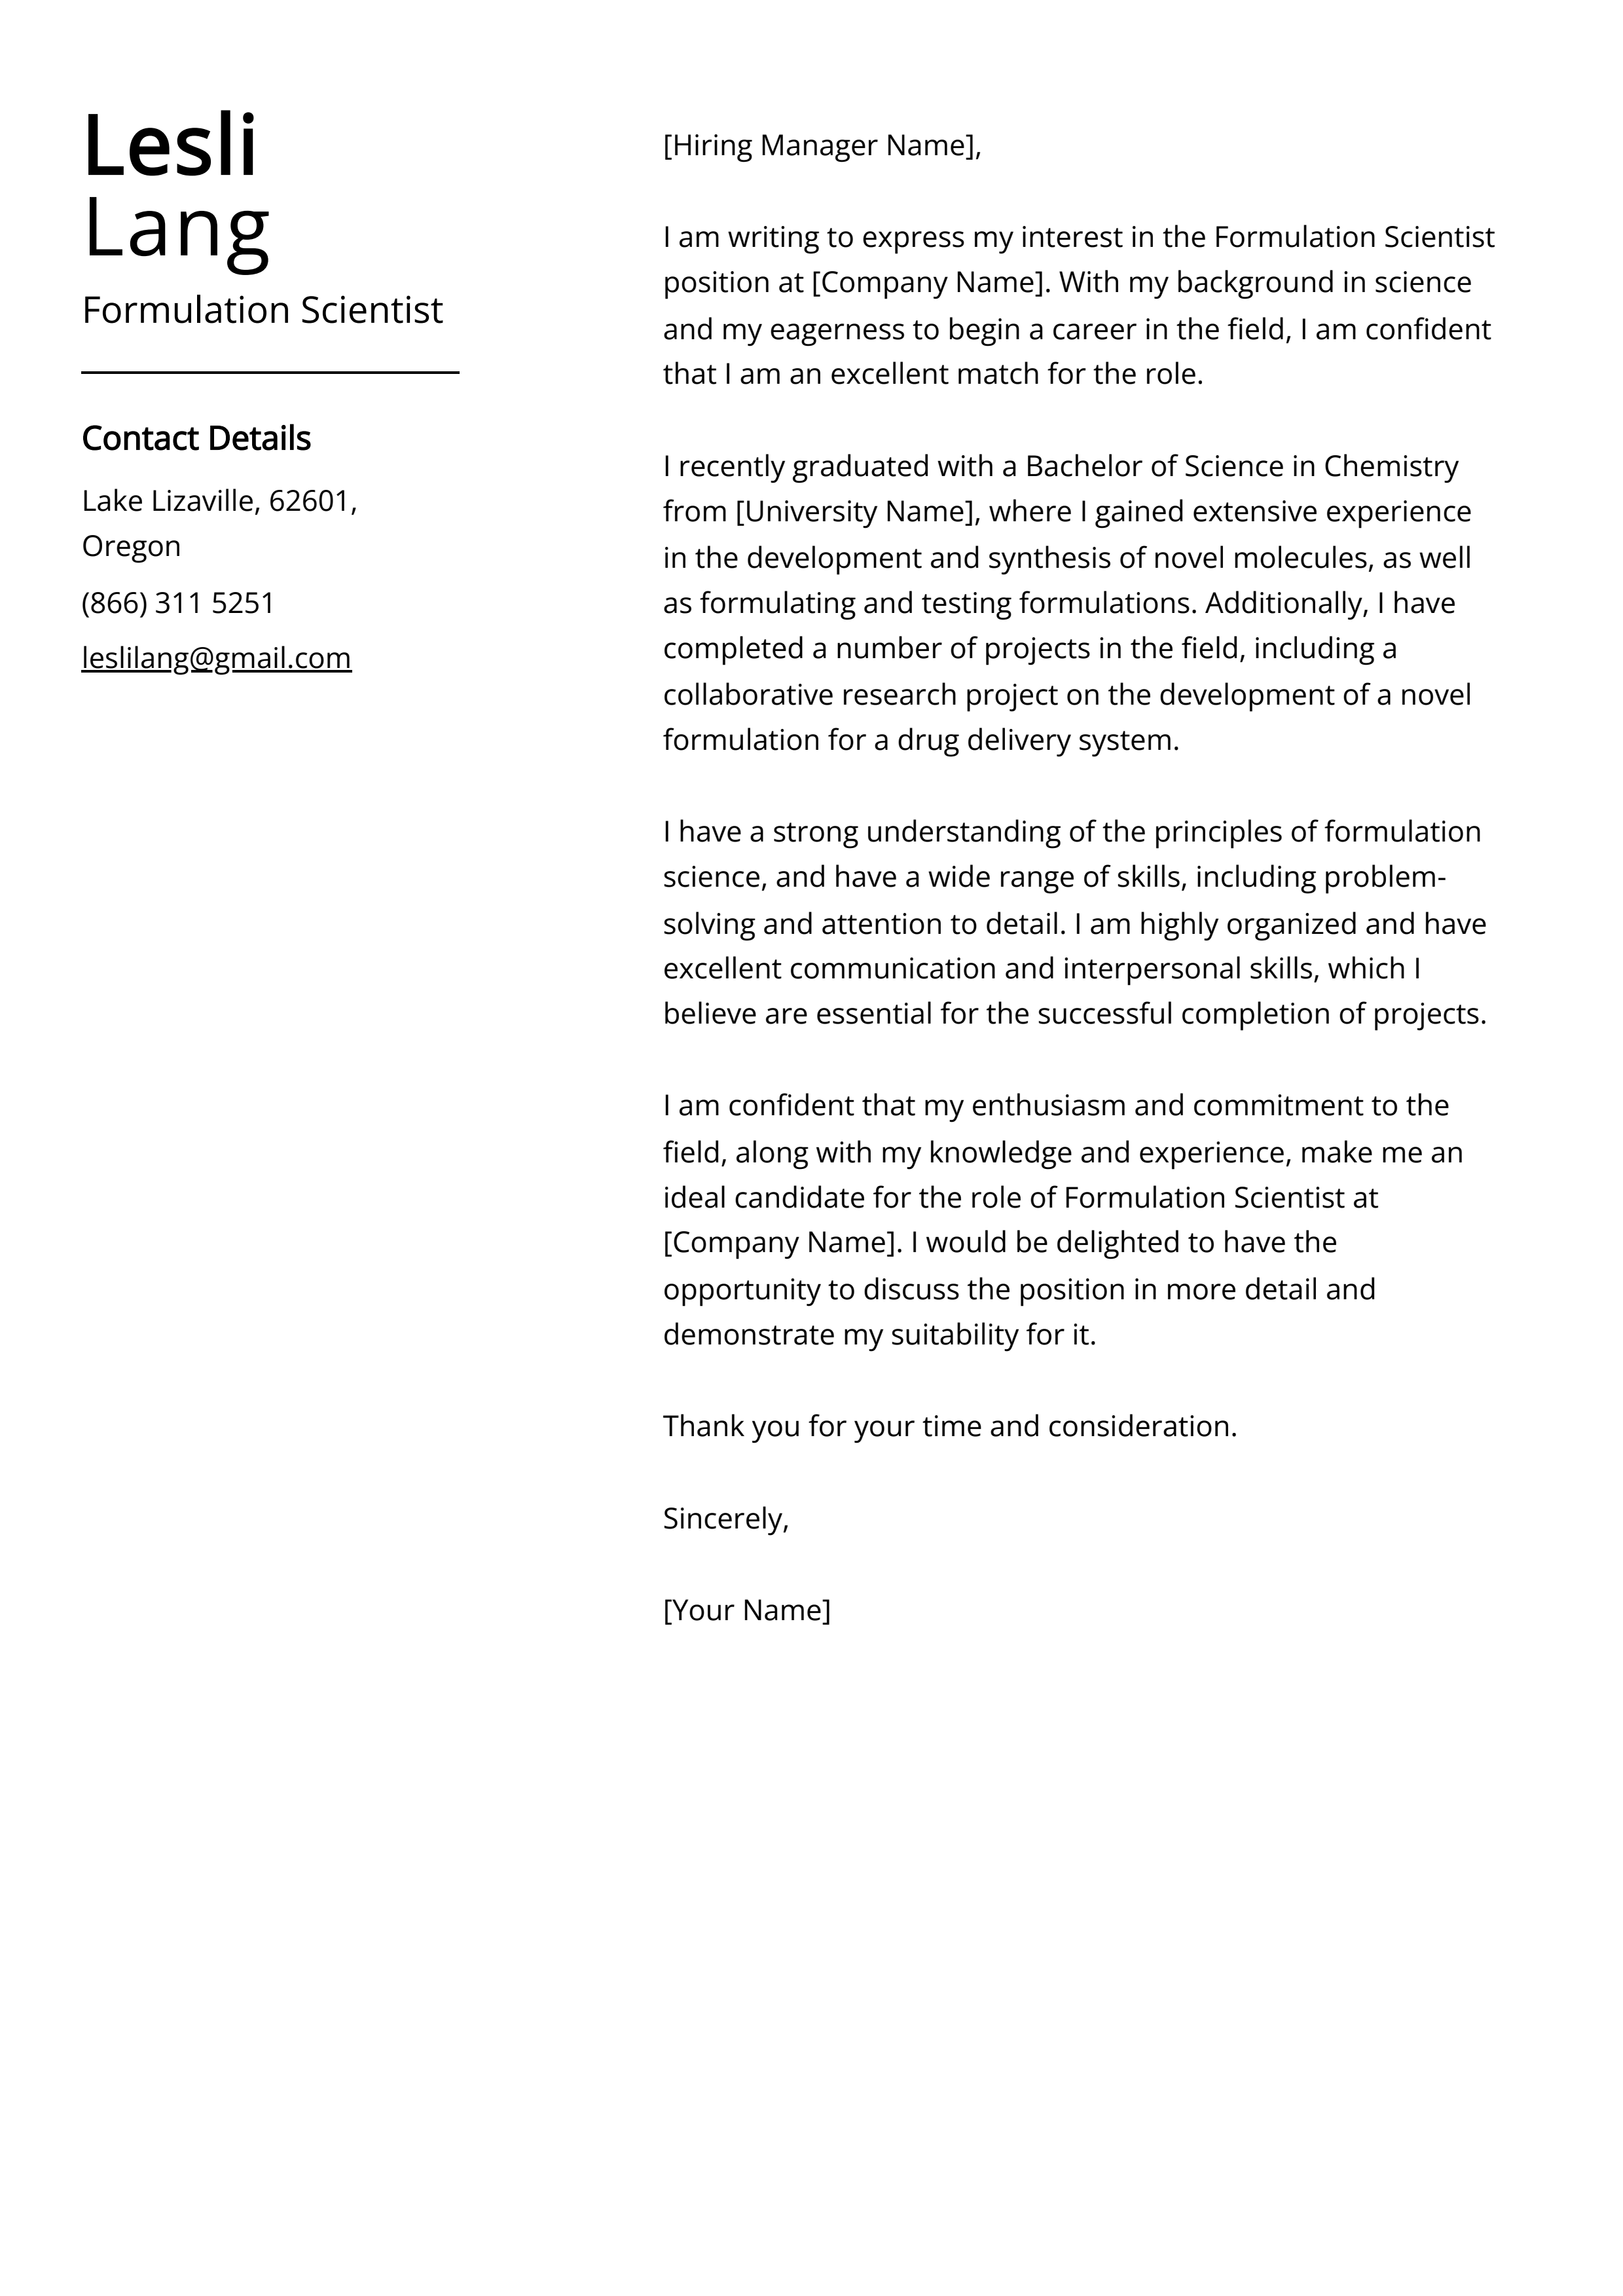 Formulation Scientist Cover Letter Example